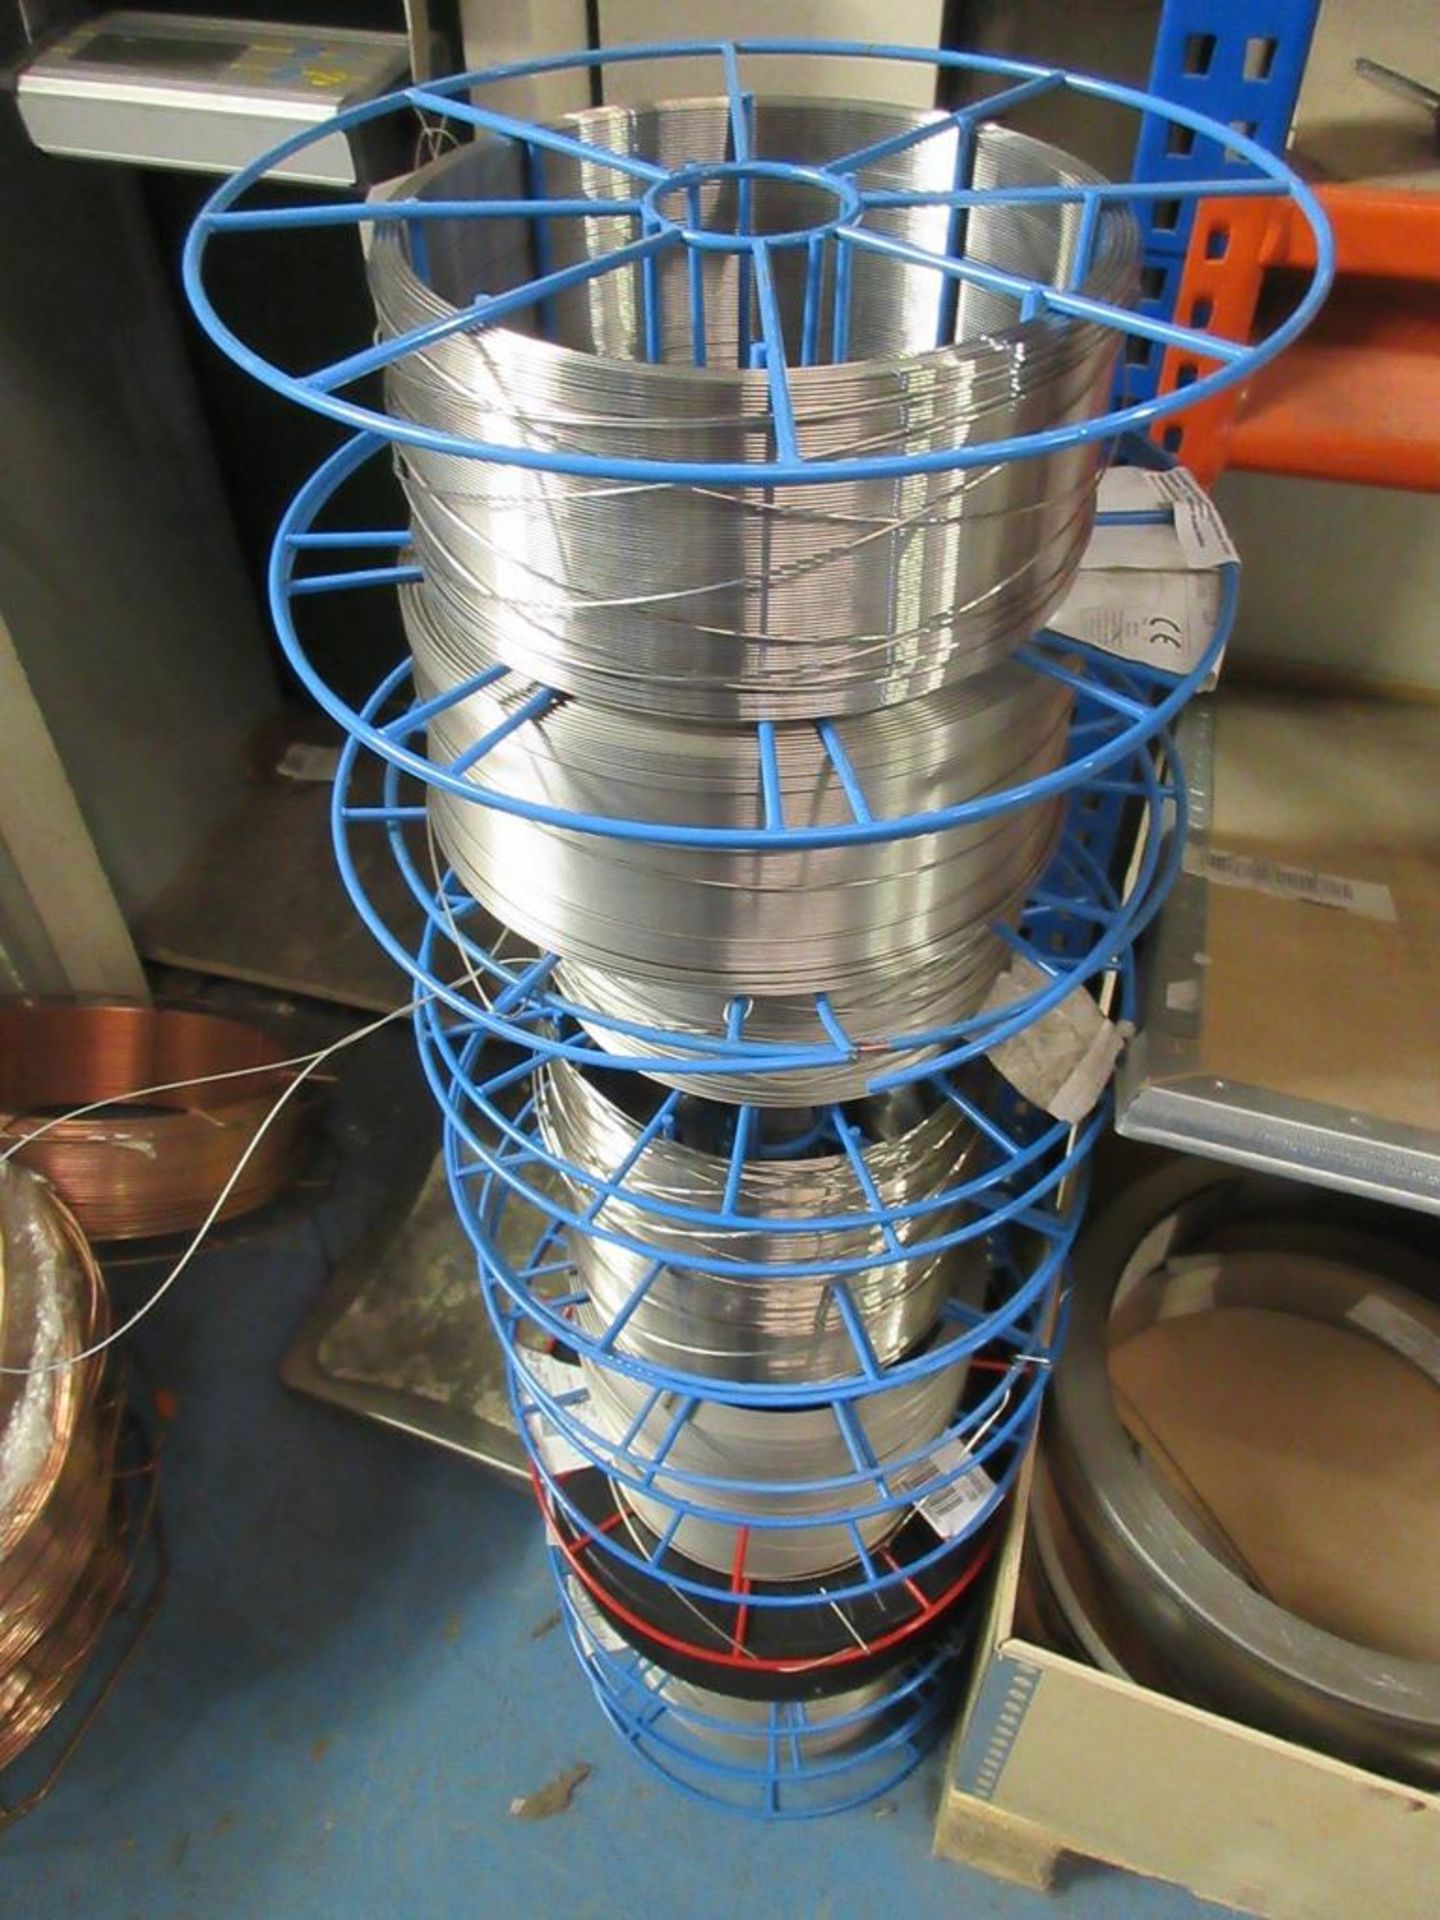 Fifteen reels of full & part welding wire, including ER385/1.2, ERNICRM03/1.2, R2209/1.2 - Image 4 of 7